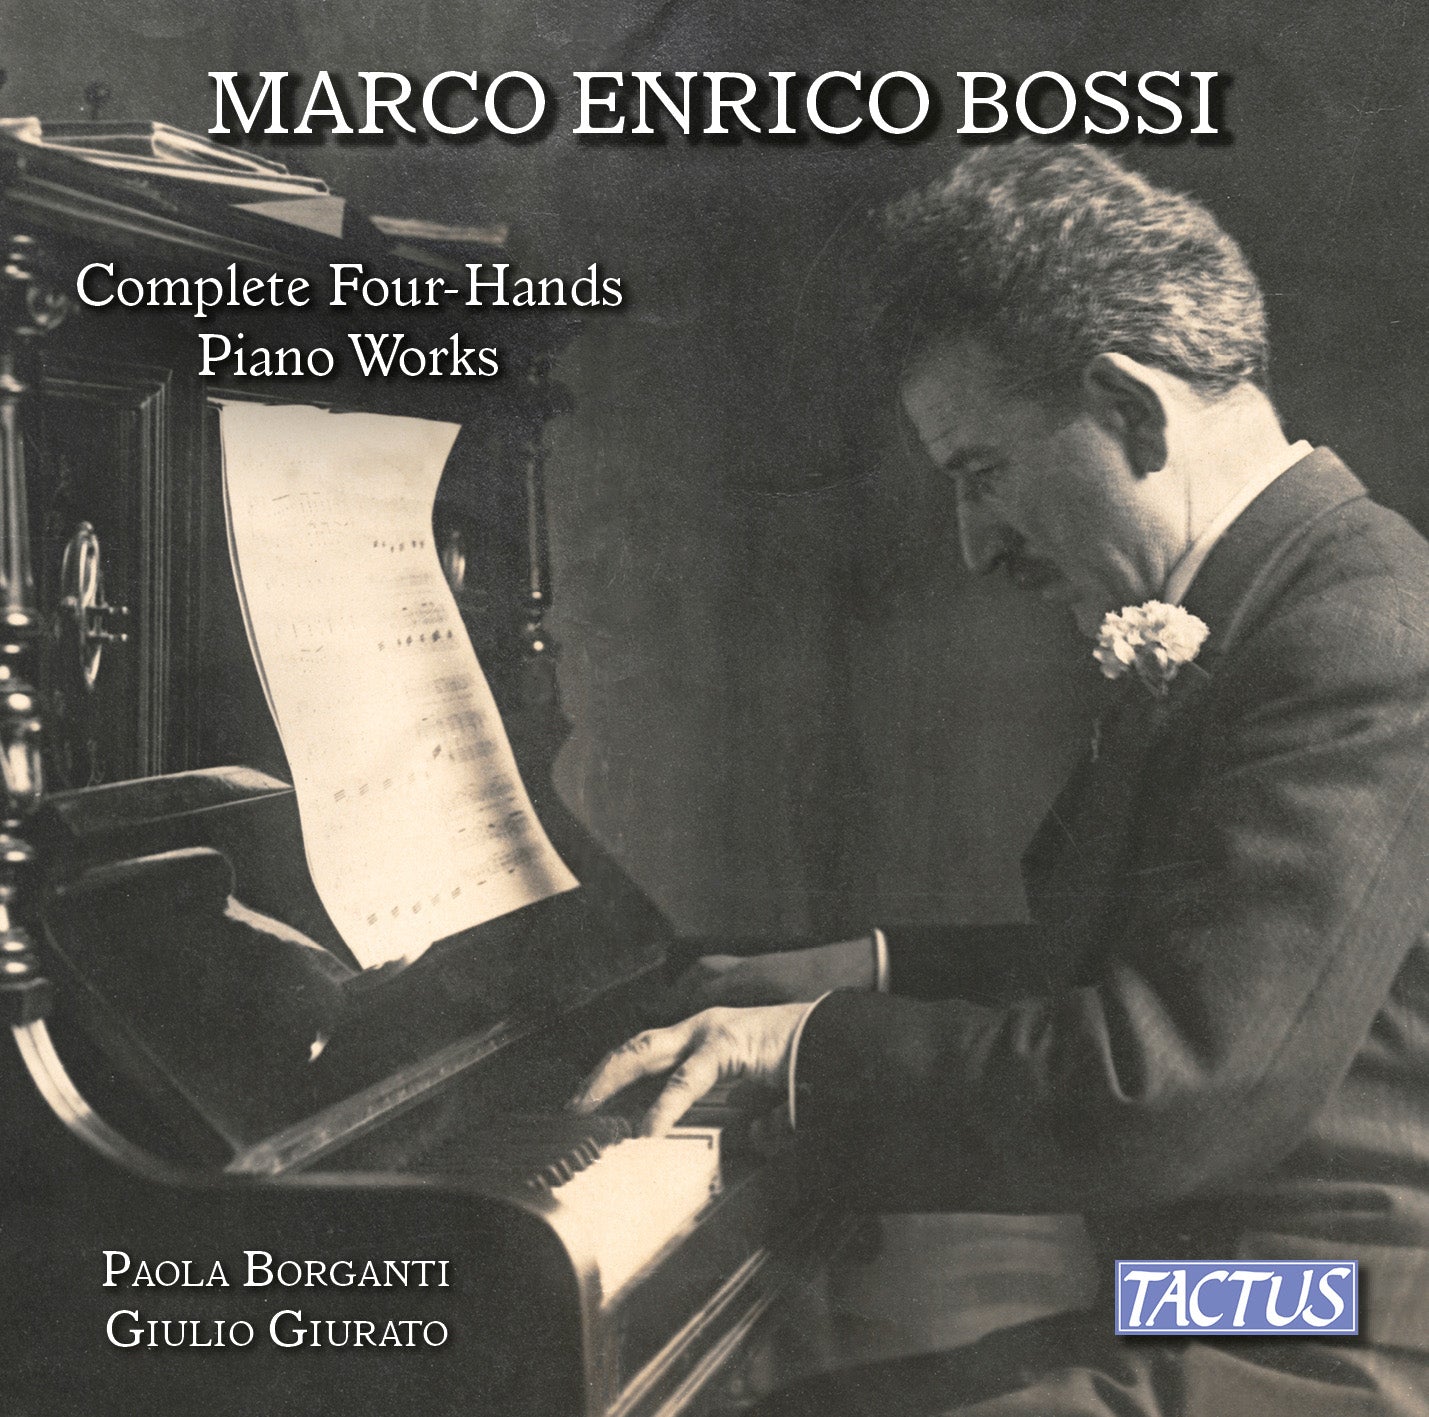 Bossi: Complete Four-Hands Piano Works